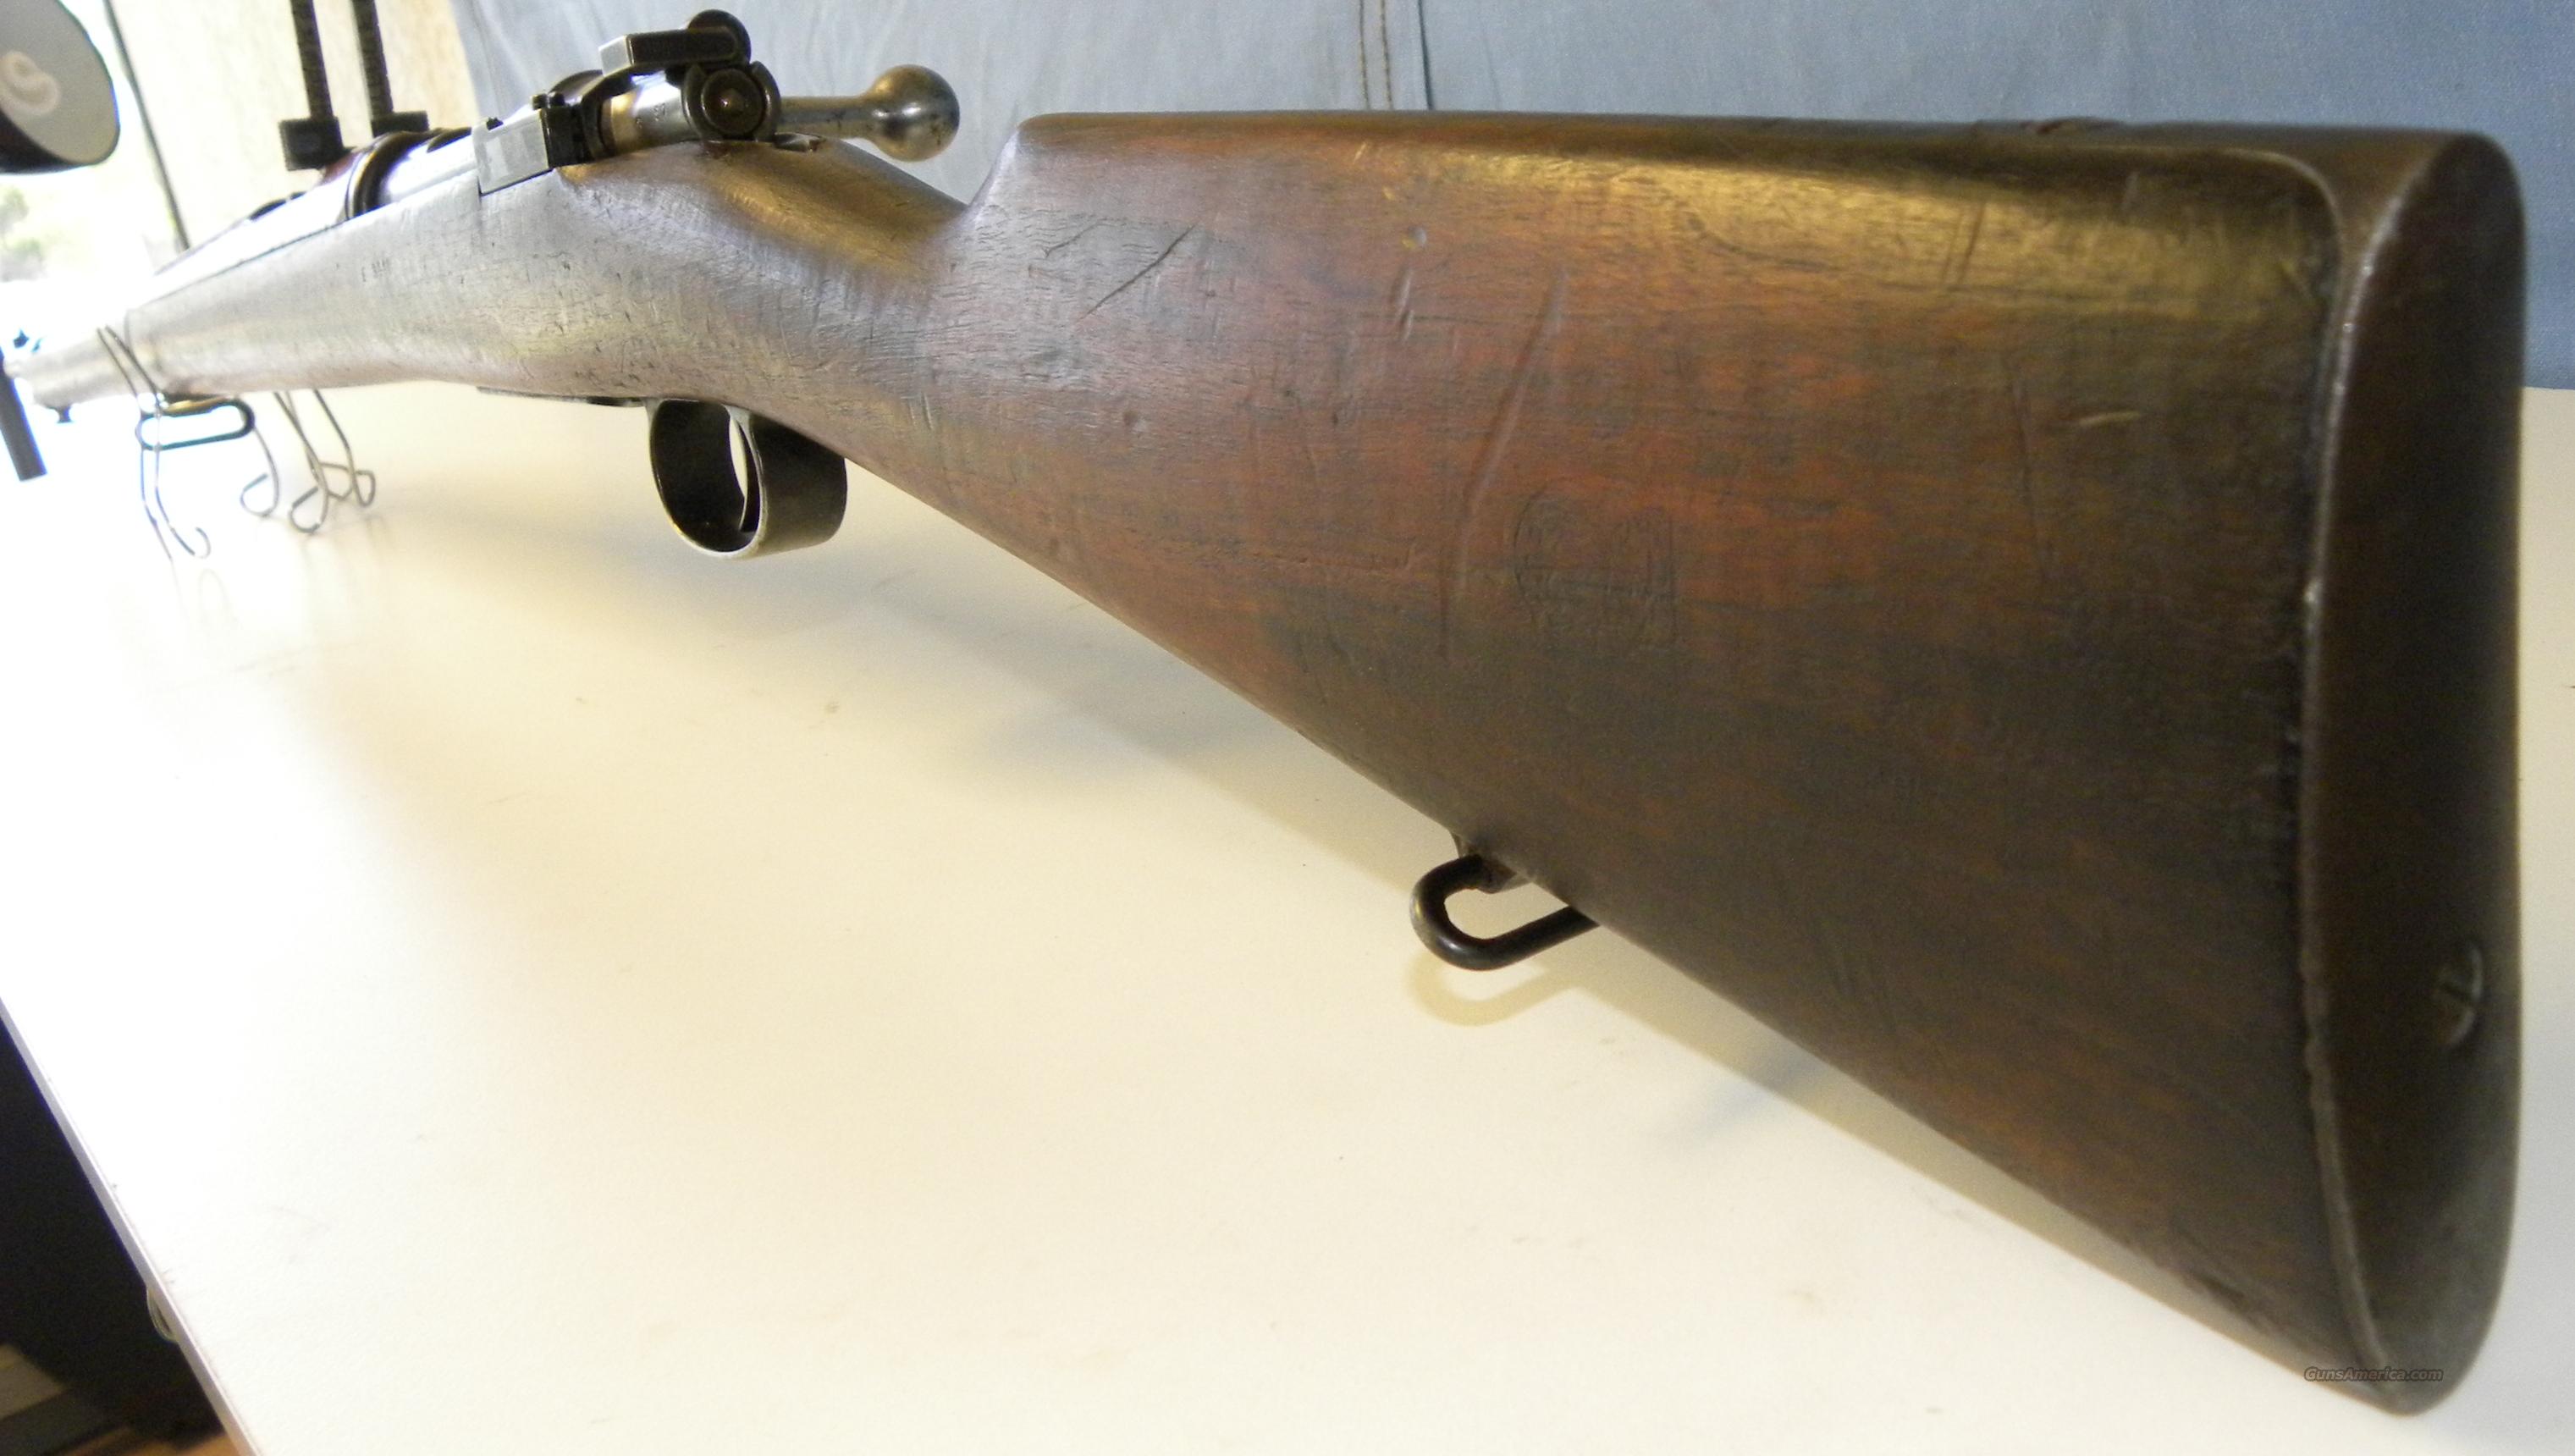 chilean mauser serial numbers